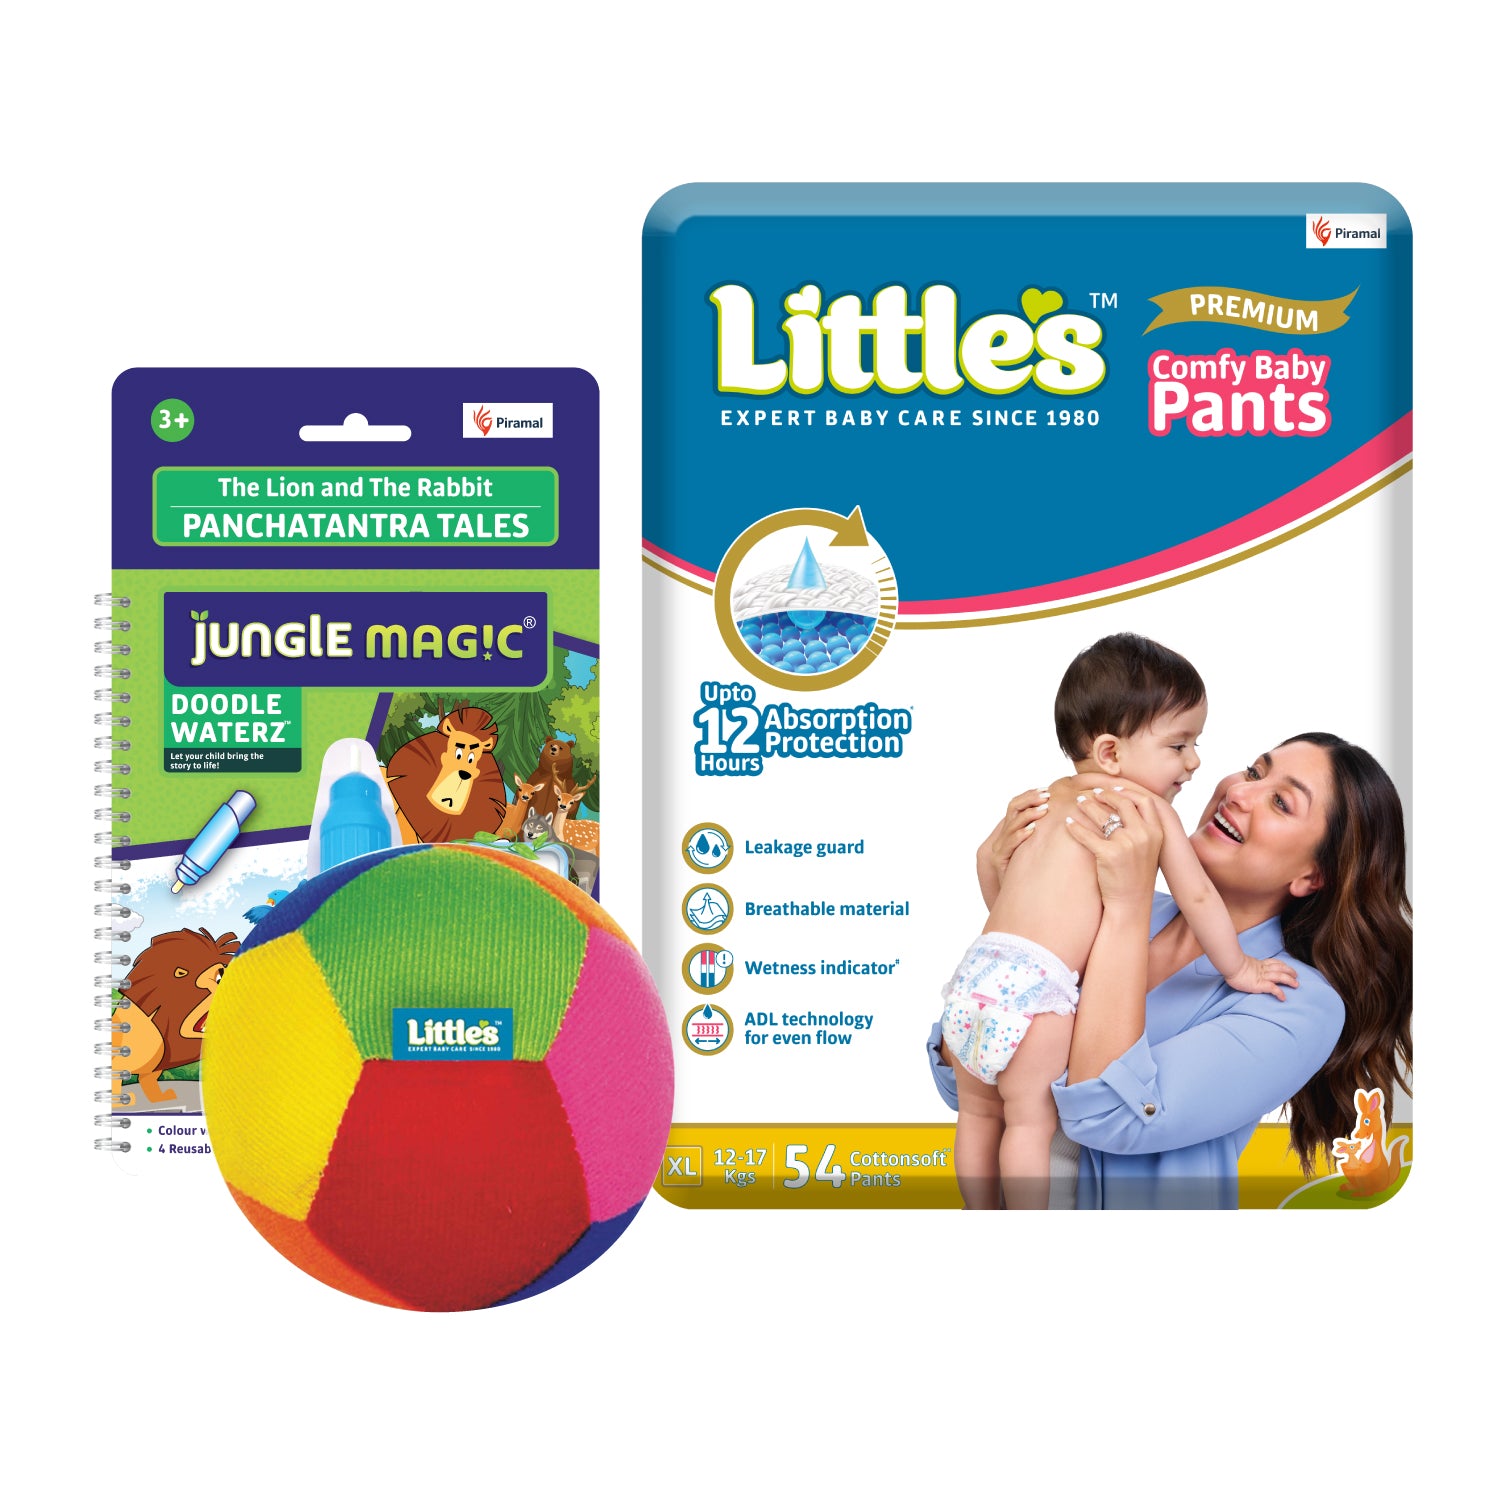 Little's Play Time Combo (Little's Comfy Baby Pants, Medium | Super Jumbo Diaper Pack of 1 I Little's Soft baby Ball I Toys for Babies I Jungle Magic Doodle Waterz Lion and Rabbit, Reusable Children's Colouring Book)